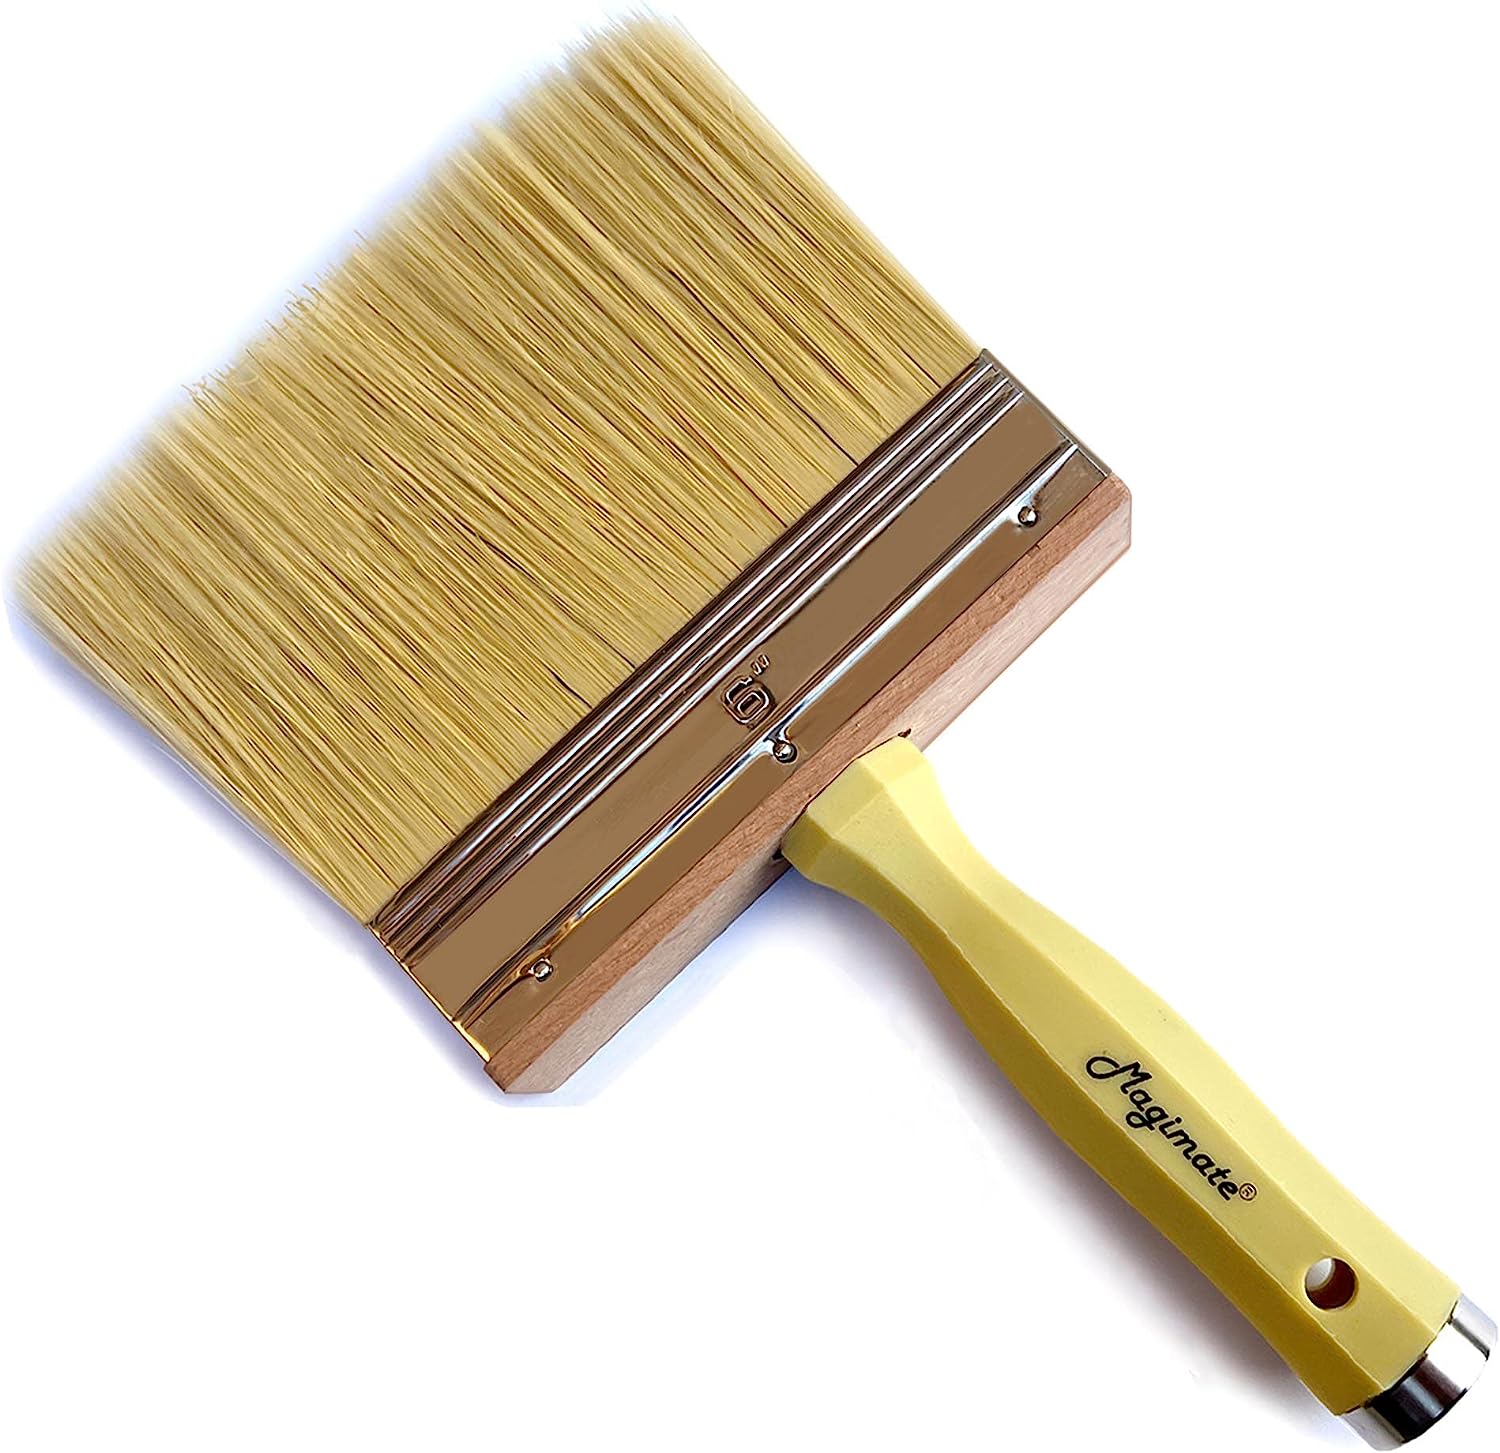 6 Inch Extra-Wide Paint Brush Large Block Stain [...]